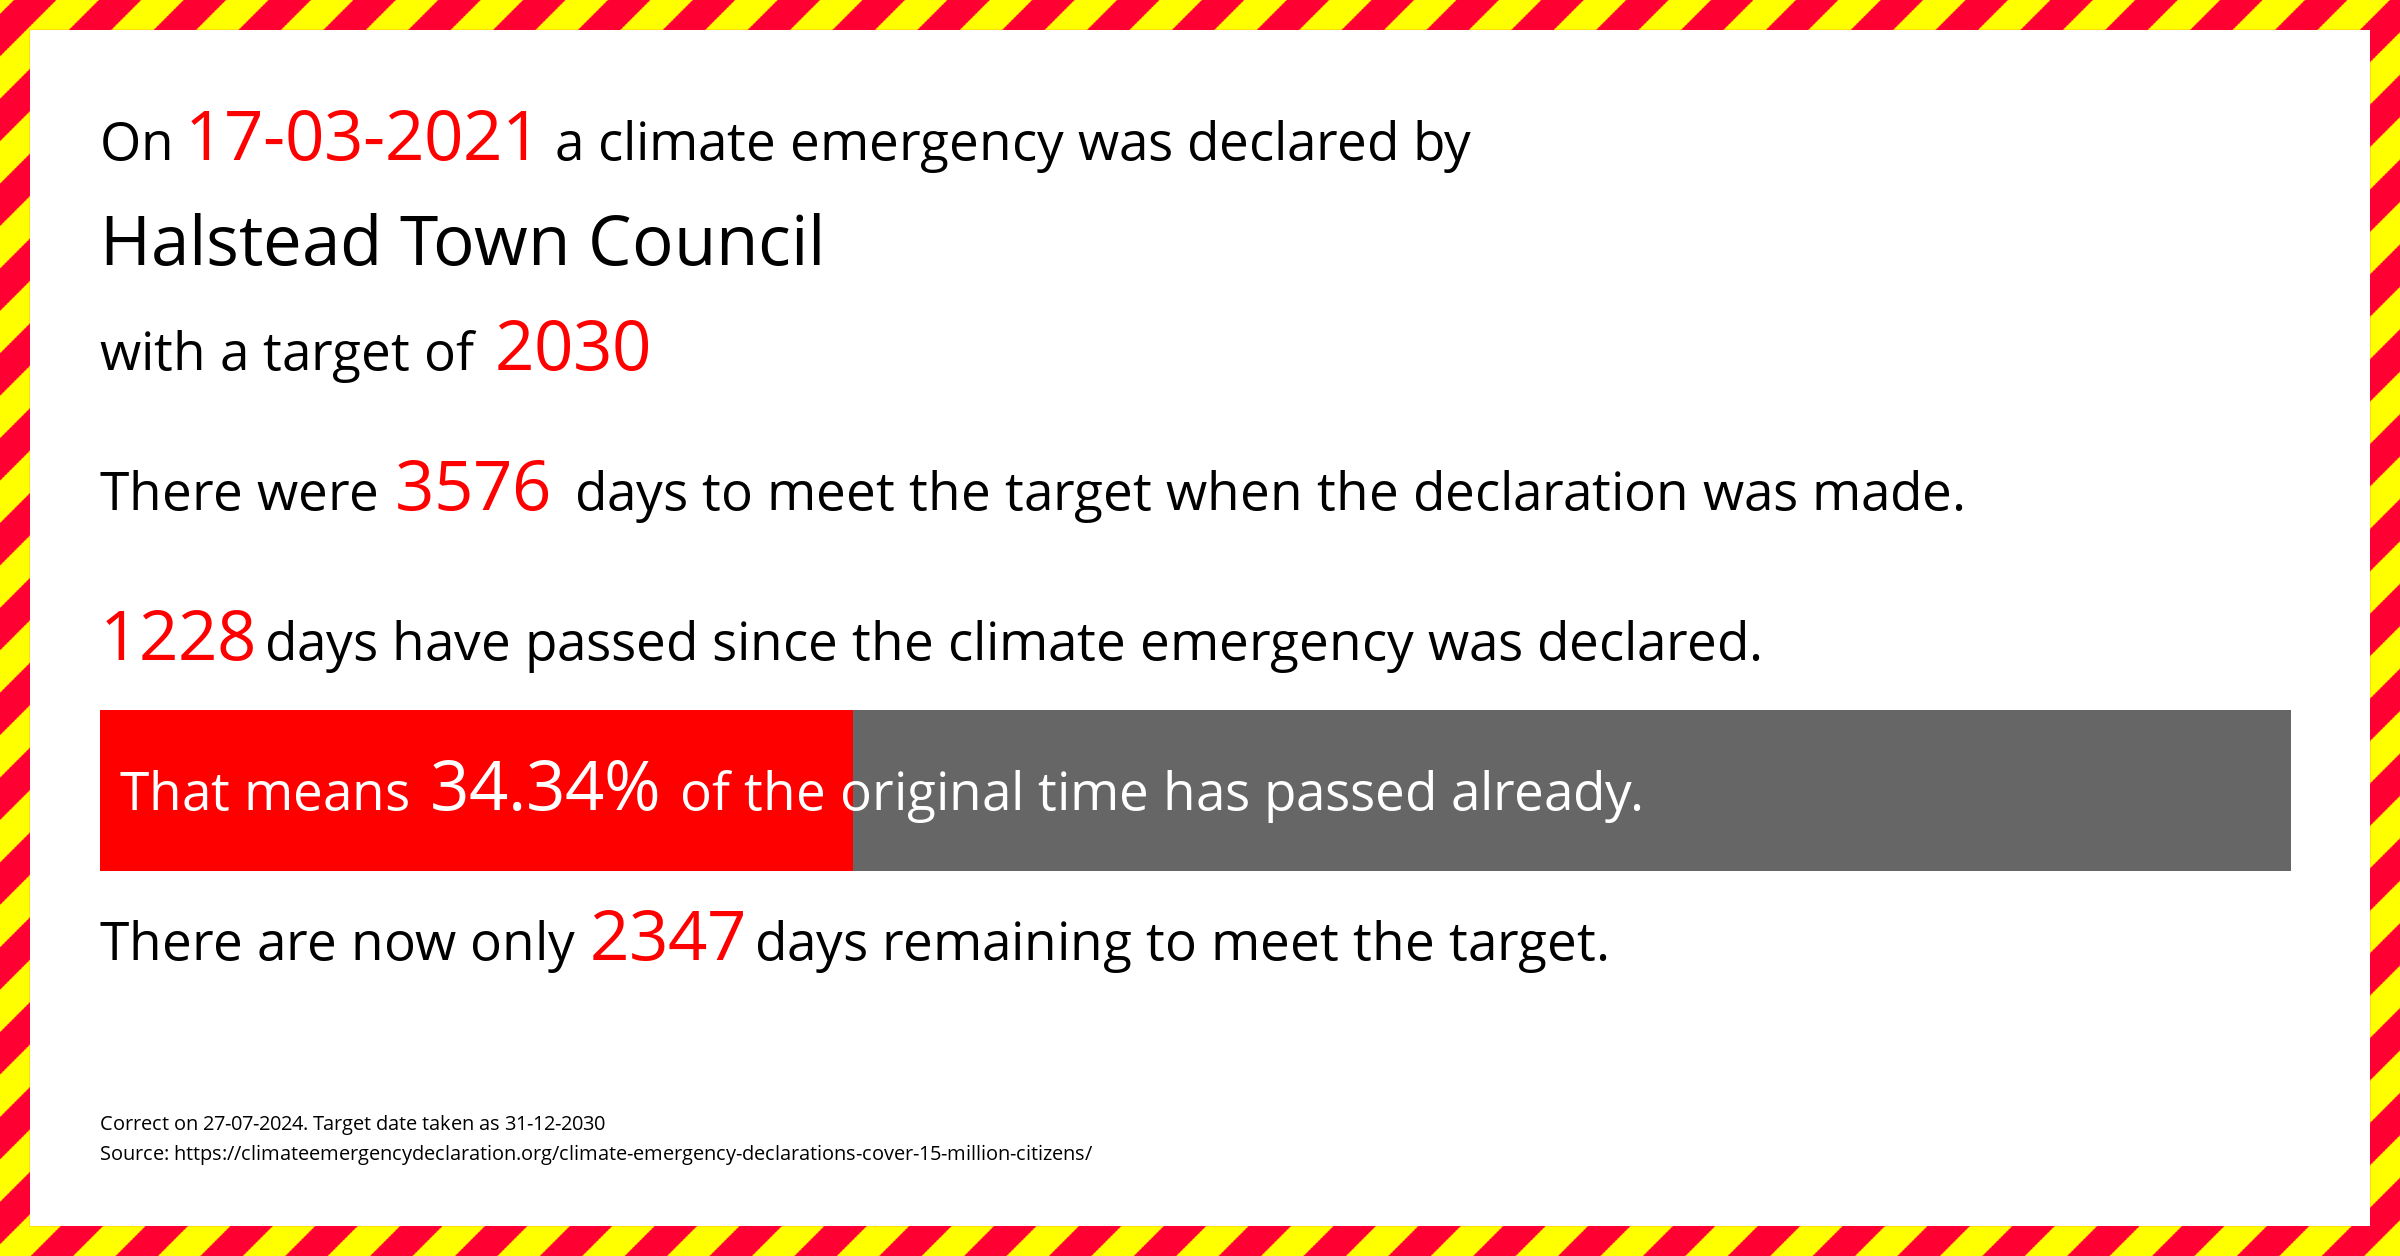 Halstead Town Council  declared a Climate emergency on Wednesday 17th March 2021, with a target of 2030.